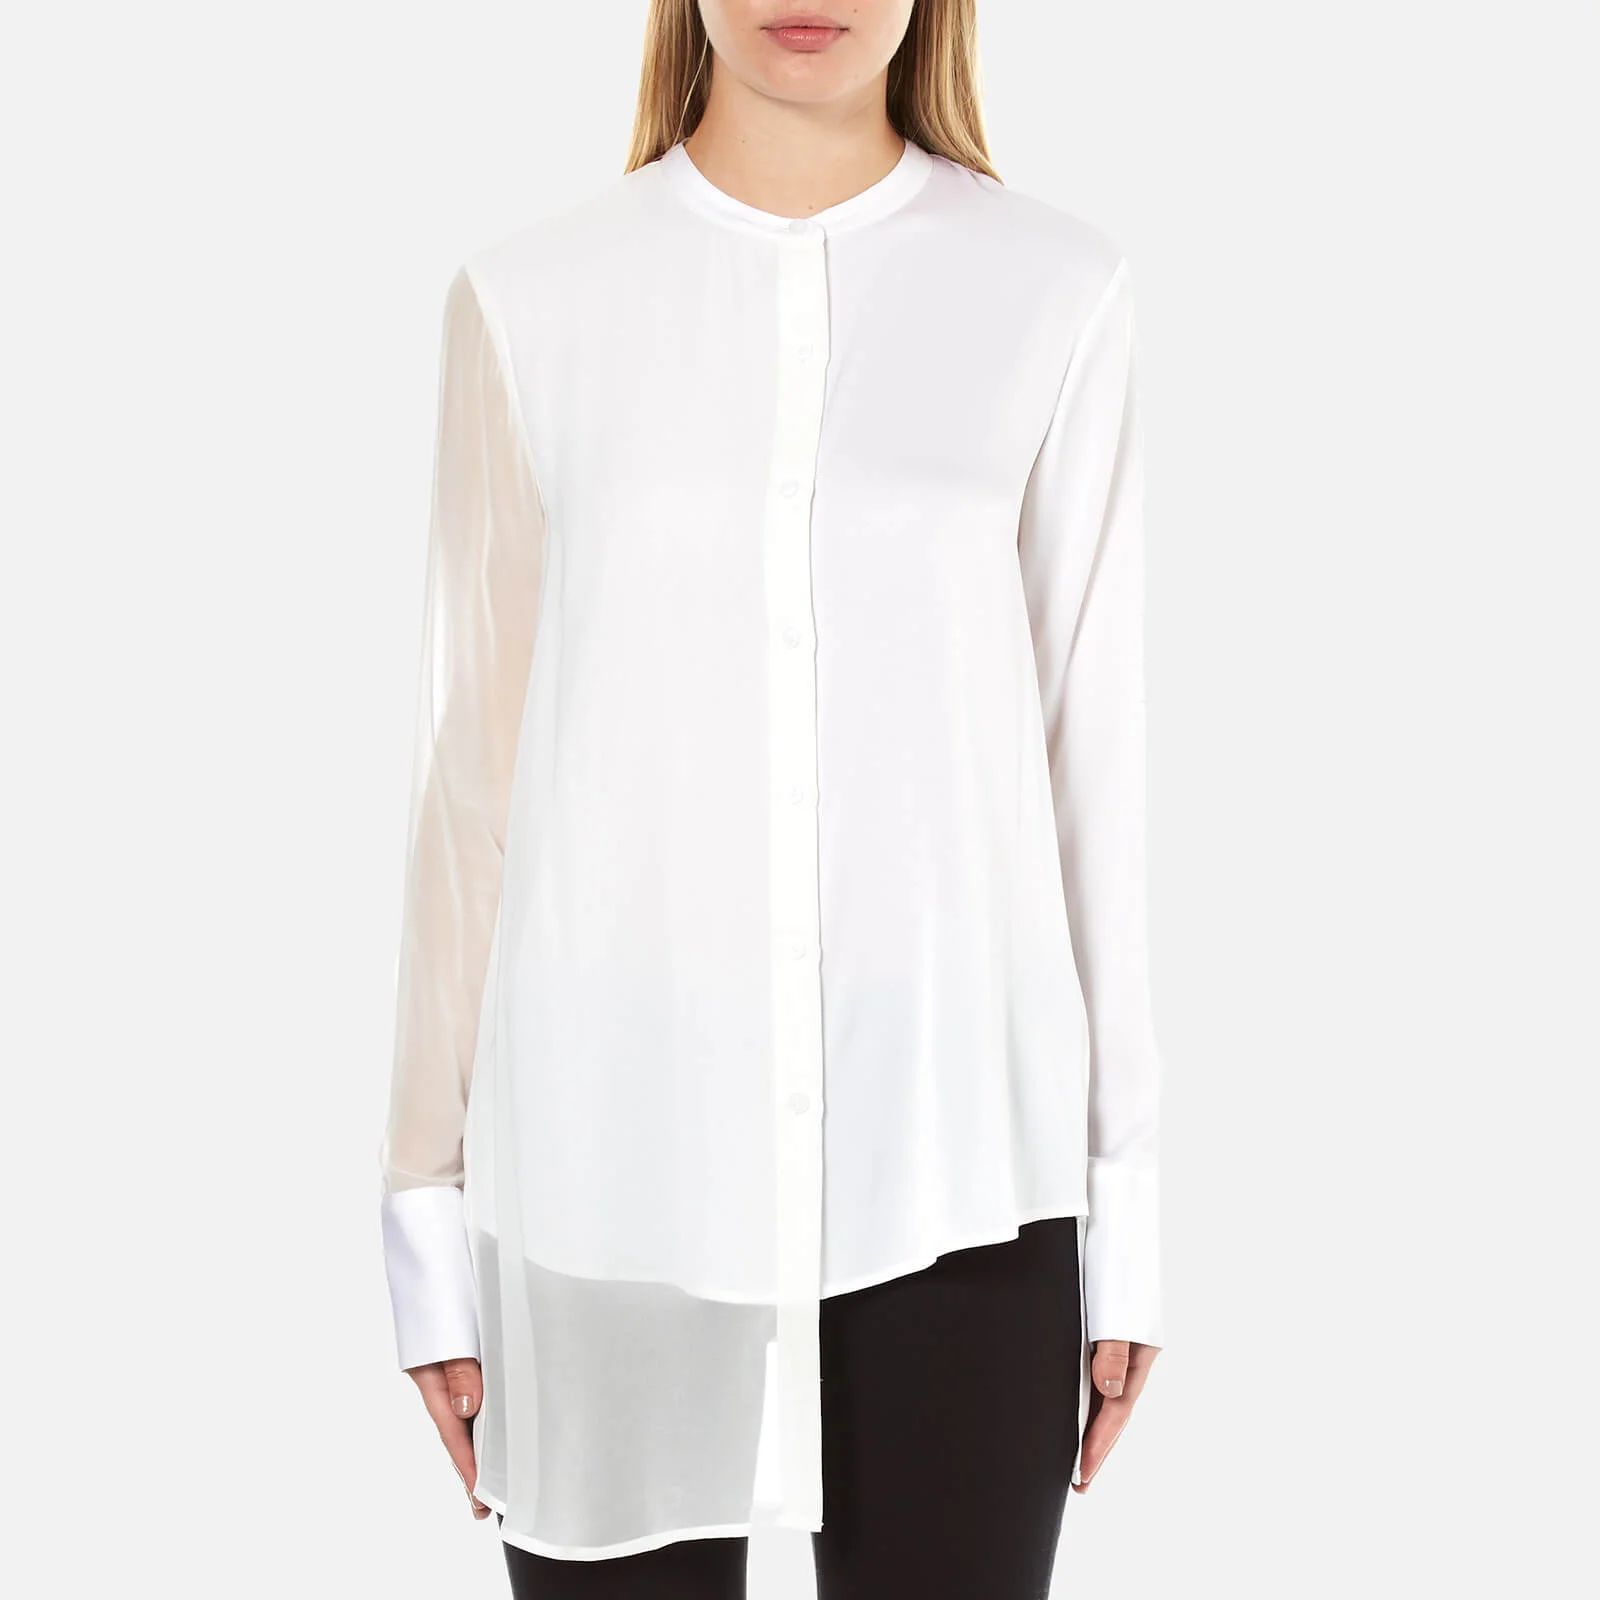 DKNY Women's Long Sleeve Button Through Shirt with Front Panel - Chalk Image 1